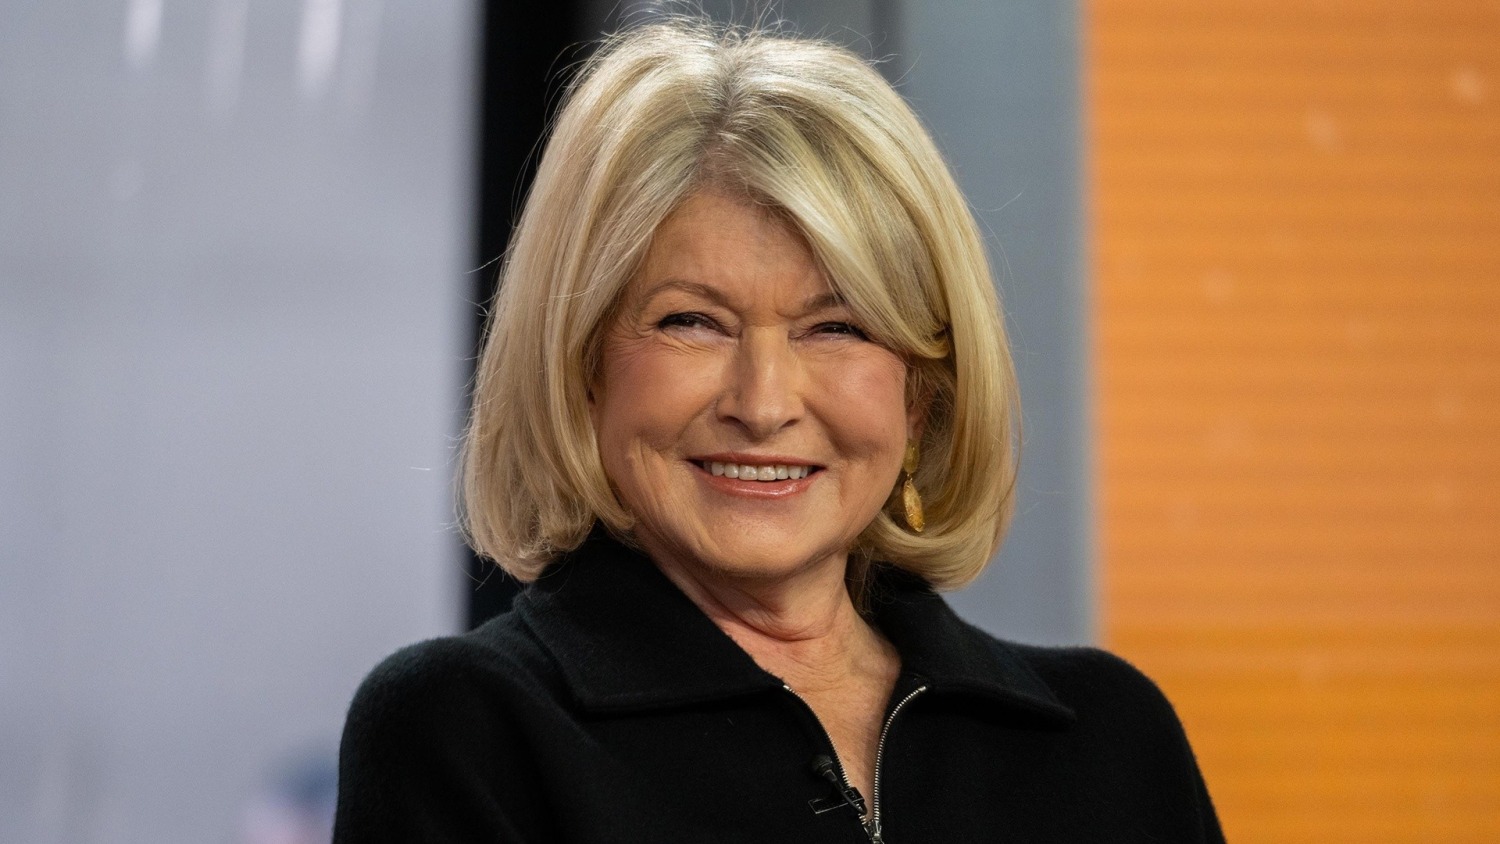 Martha Stewart Everyday Arrives with a Fresh Look and Purpose